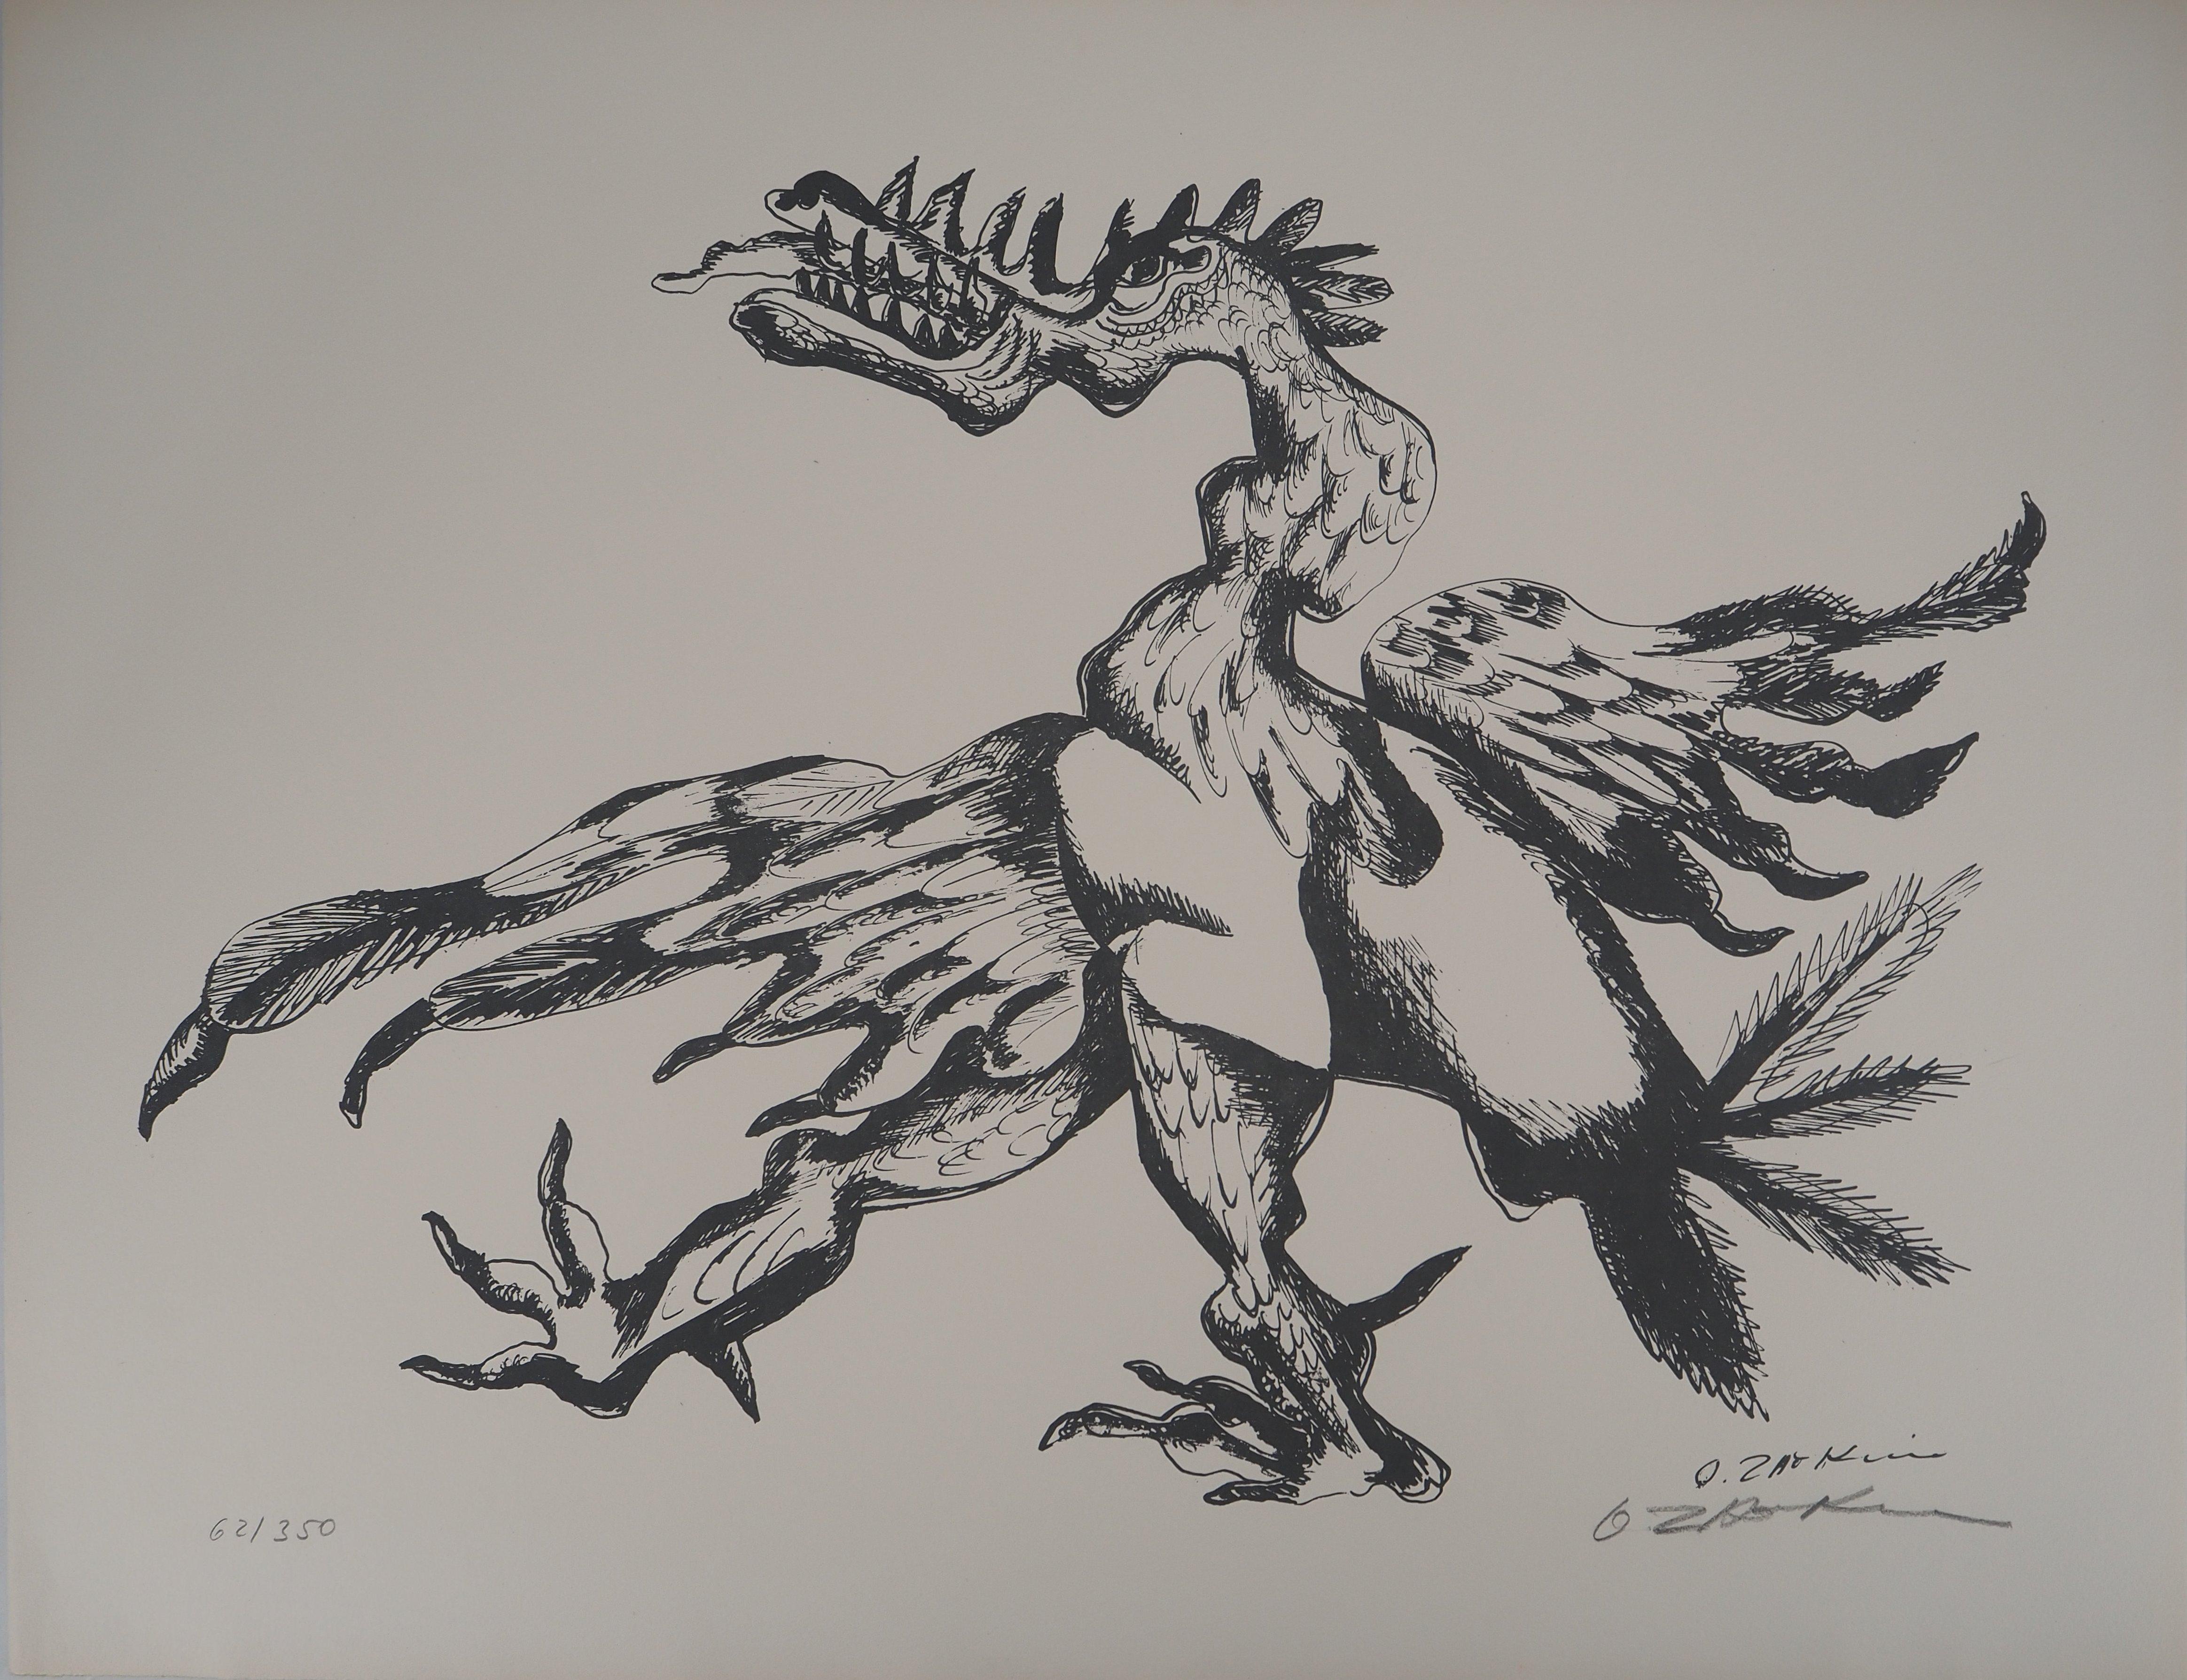 Ossip Zadkine Figurative Print - Mythology : Heracles and a Bird - Original Lithograph Hand Signed & Numbered